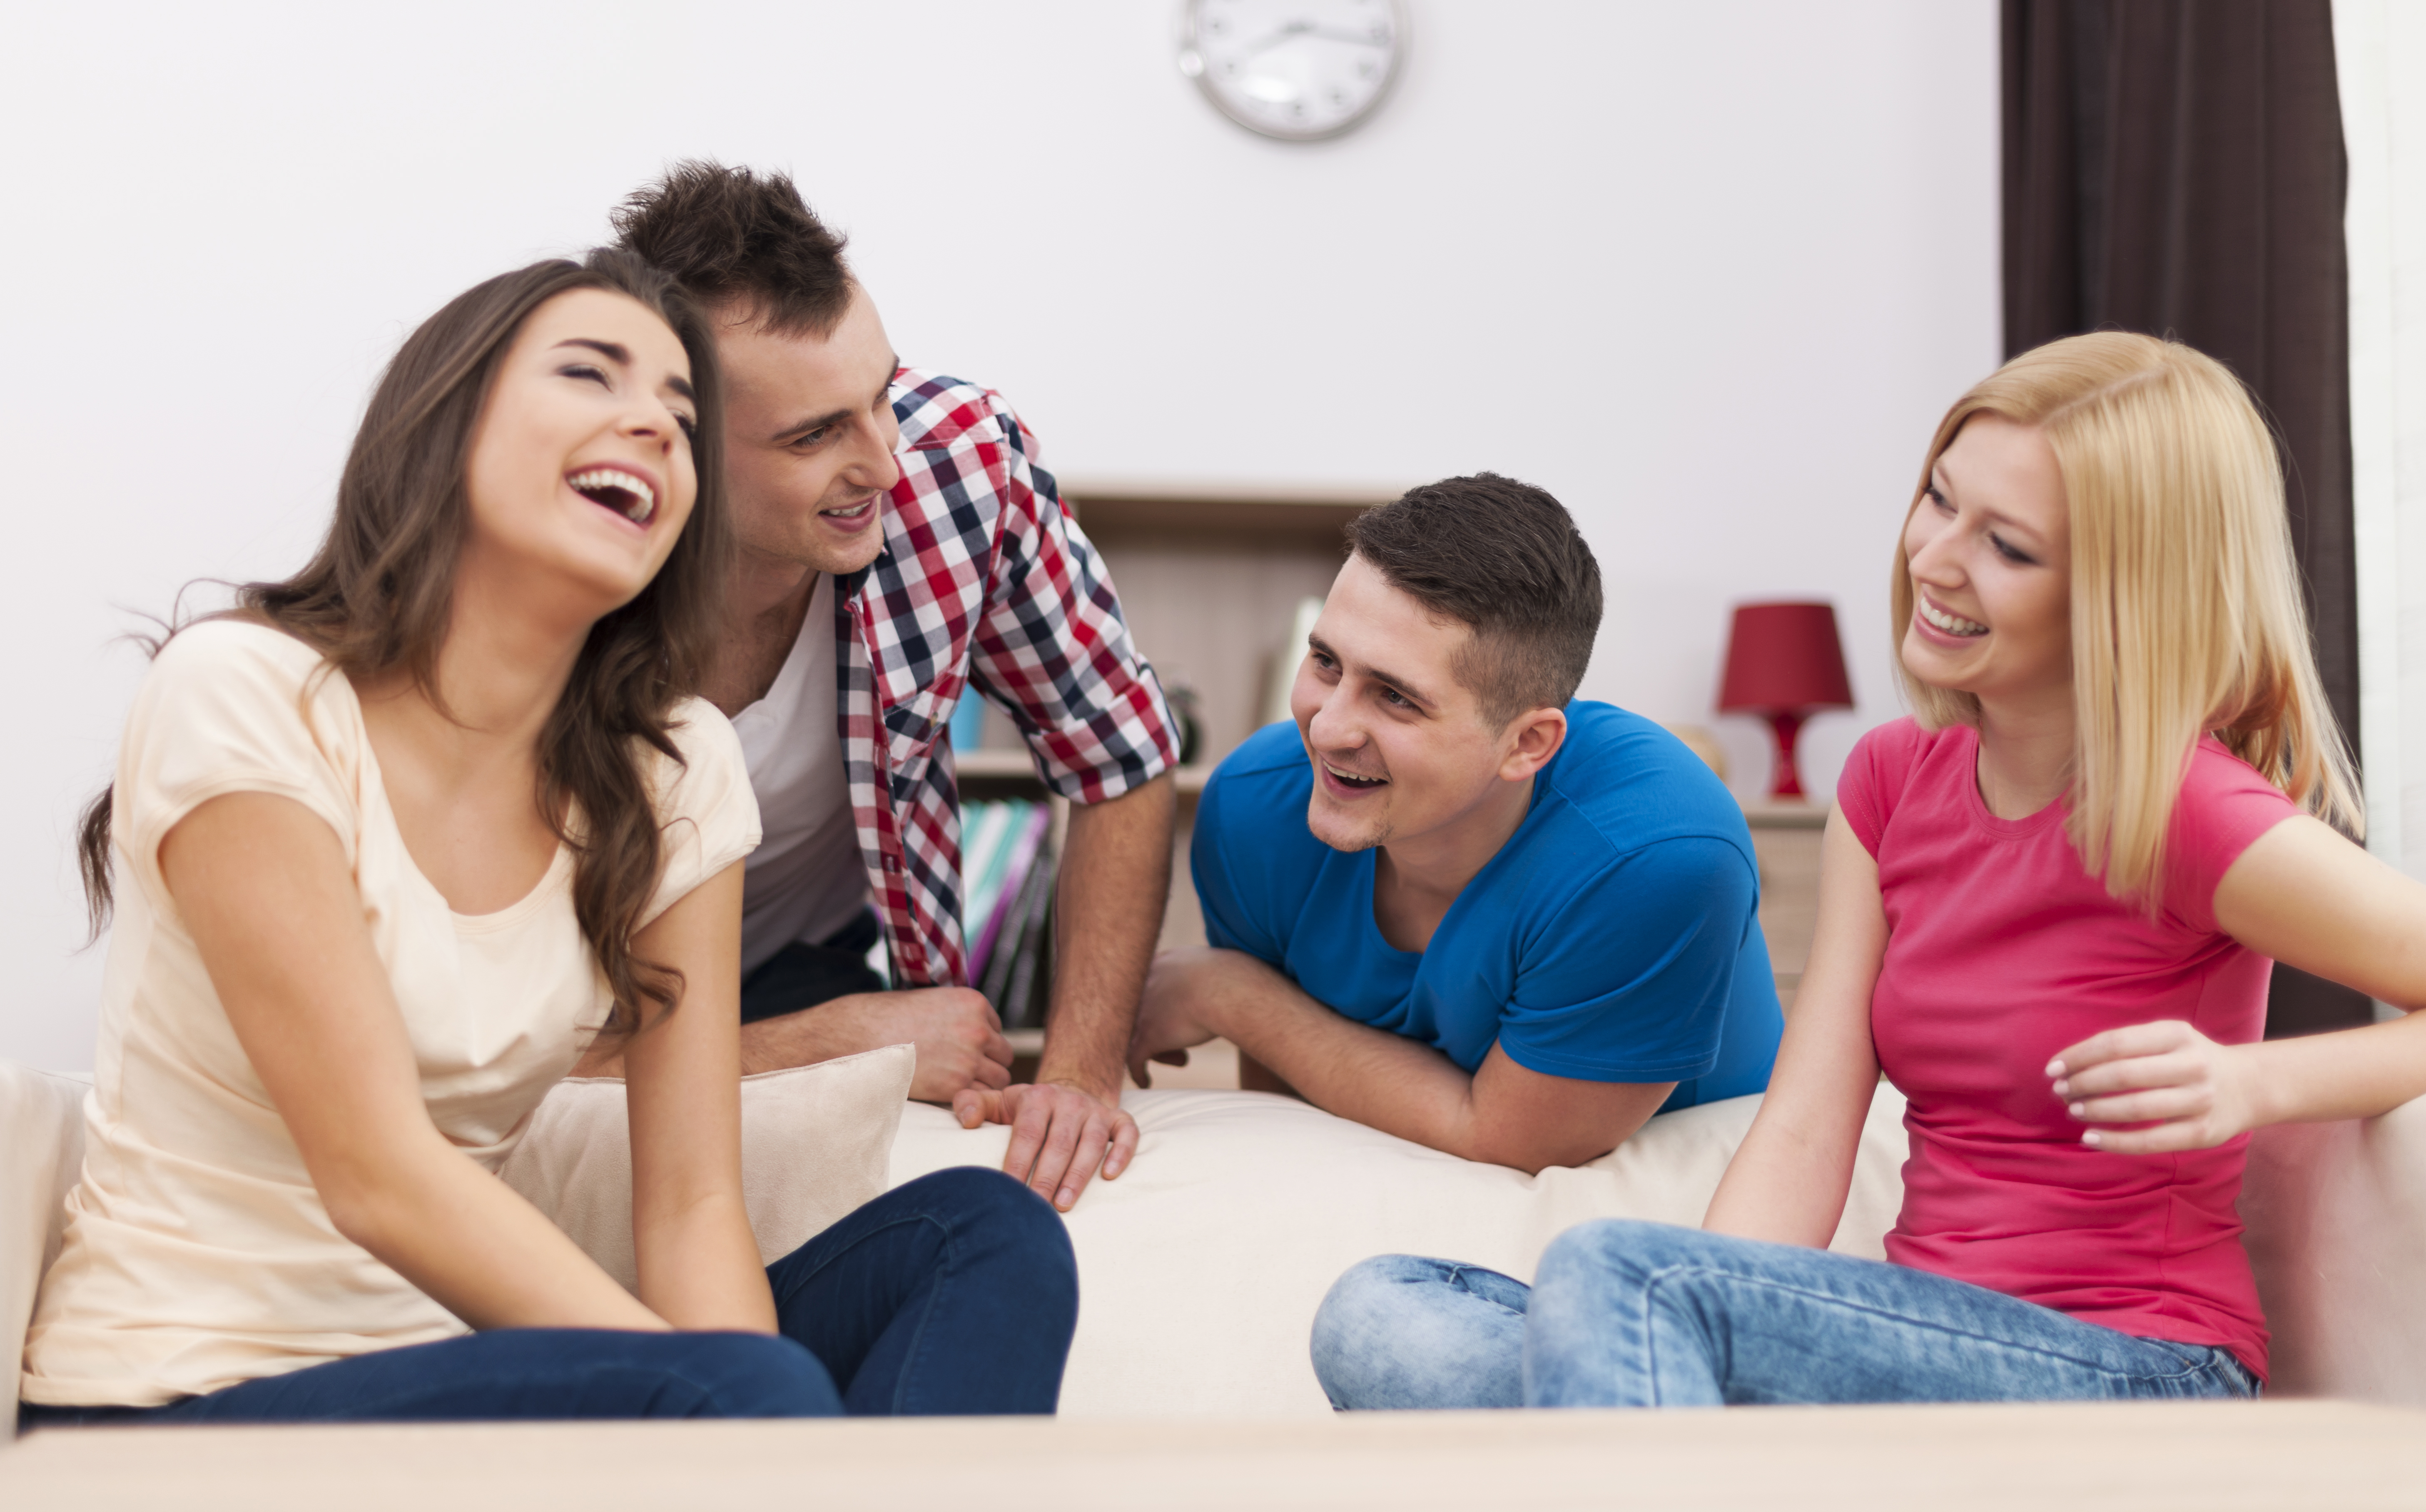 People laughing while sitting on the couch | Source: Freepik